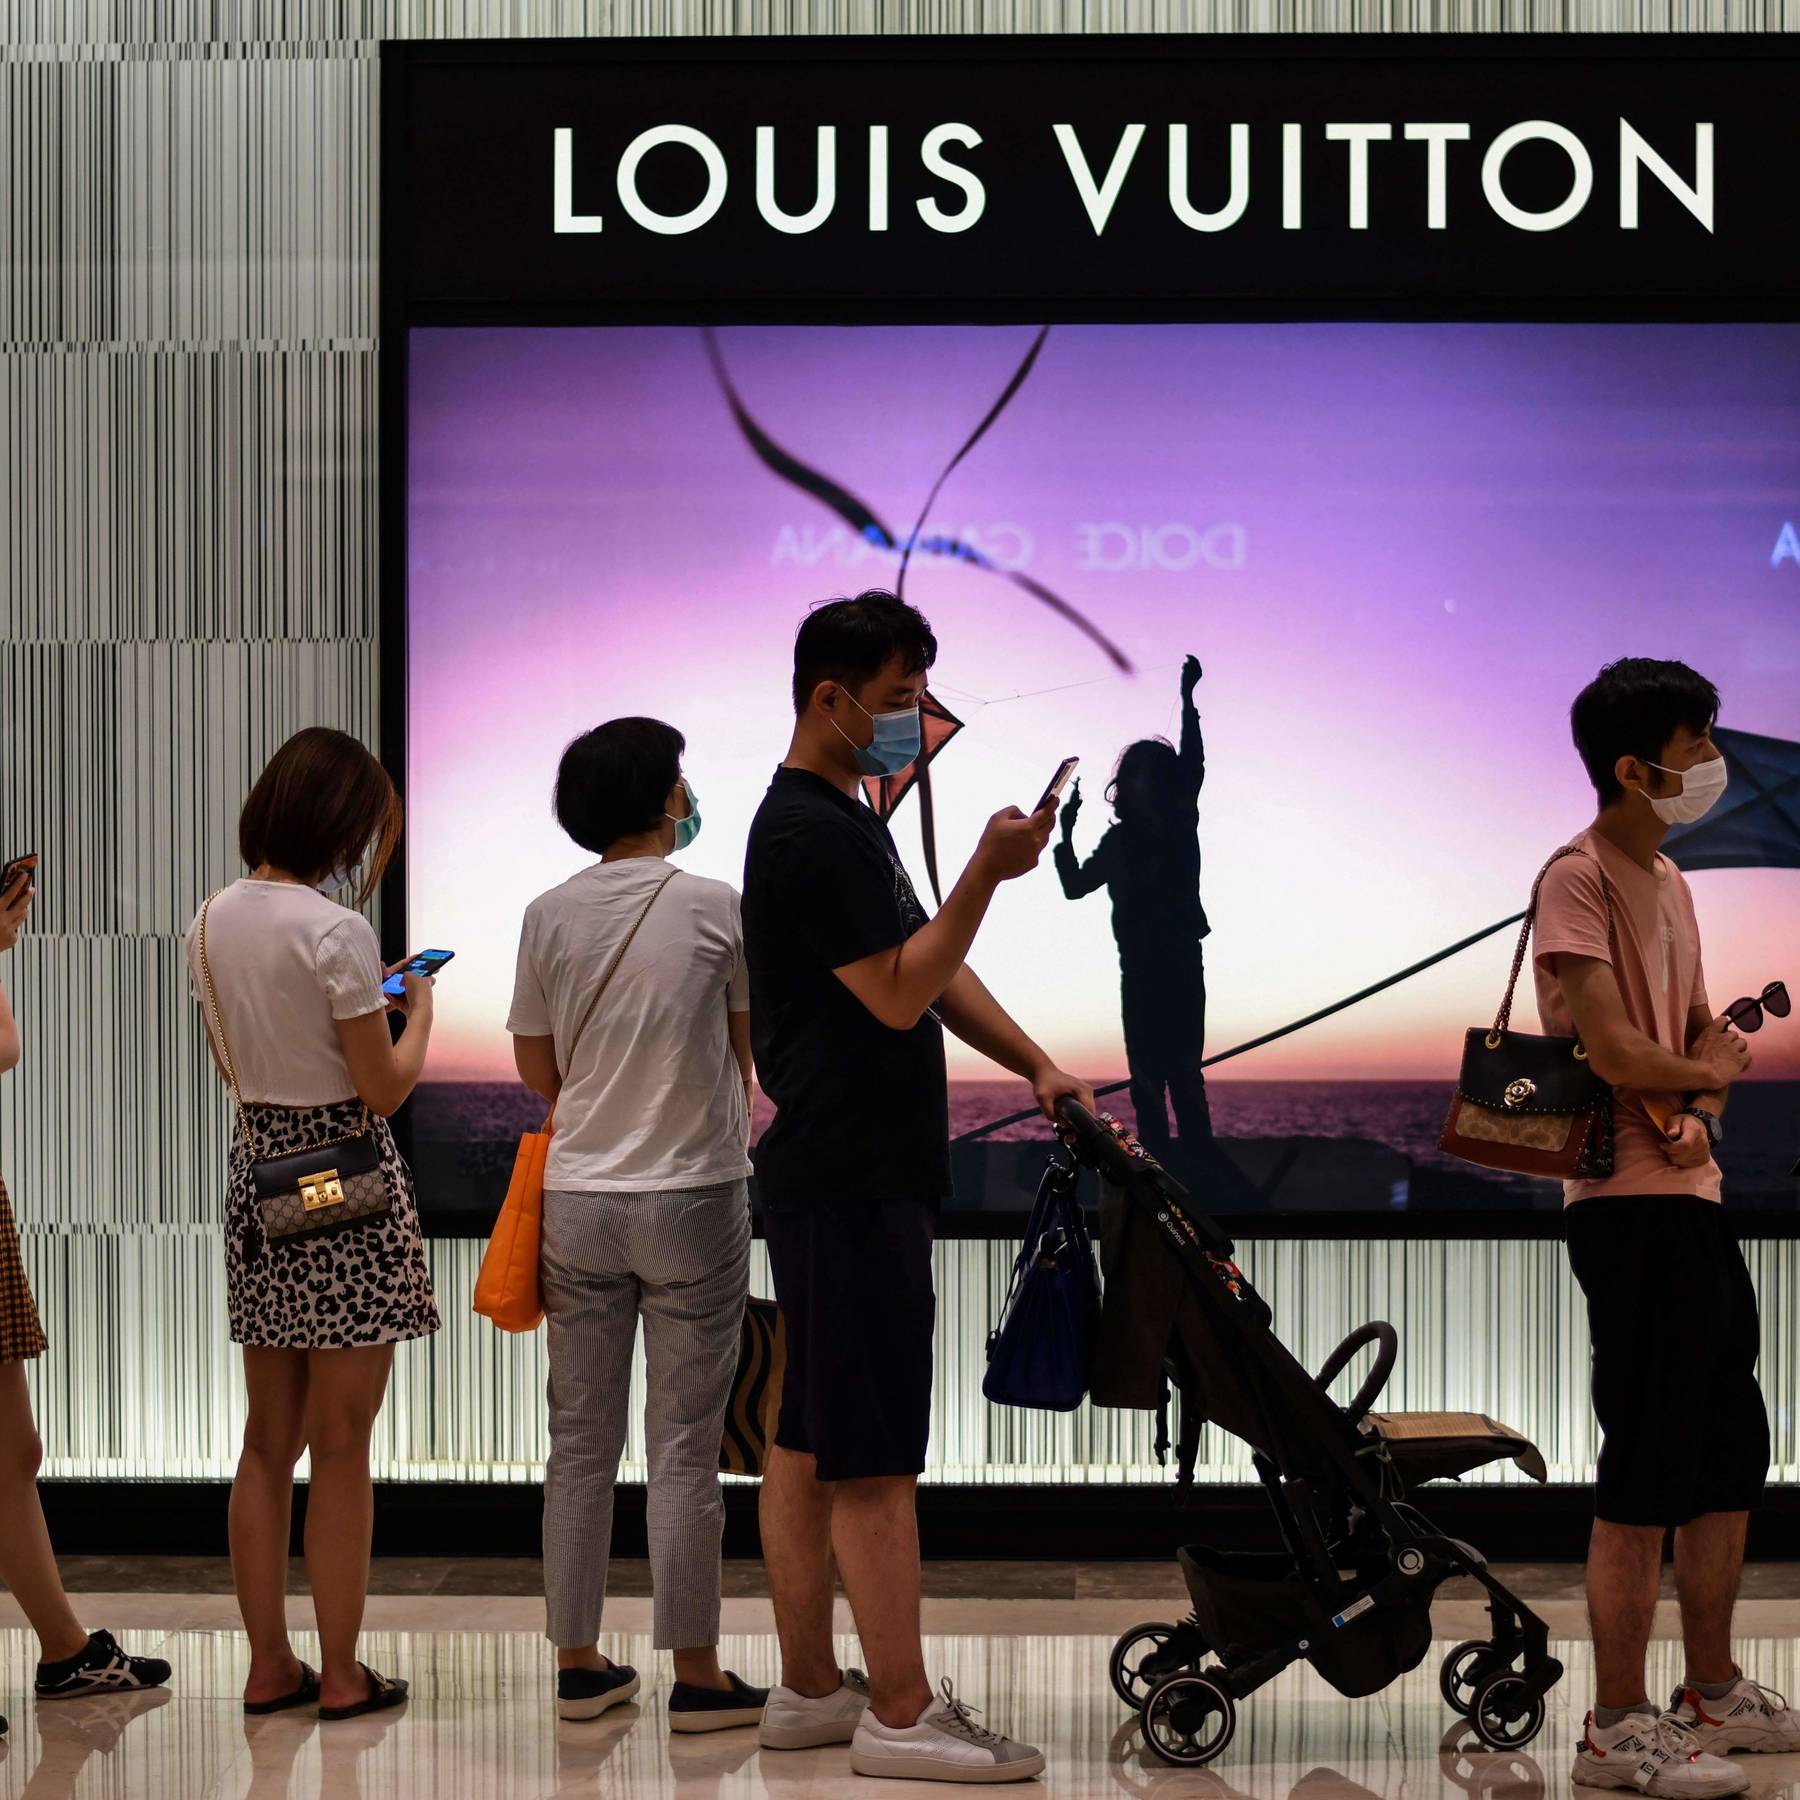 Report: LVMH Mulls First Louis Vuitton Duty Free Store in China